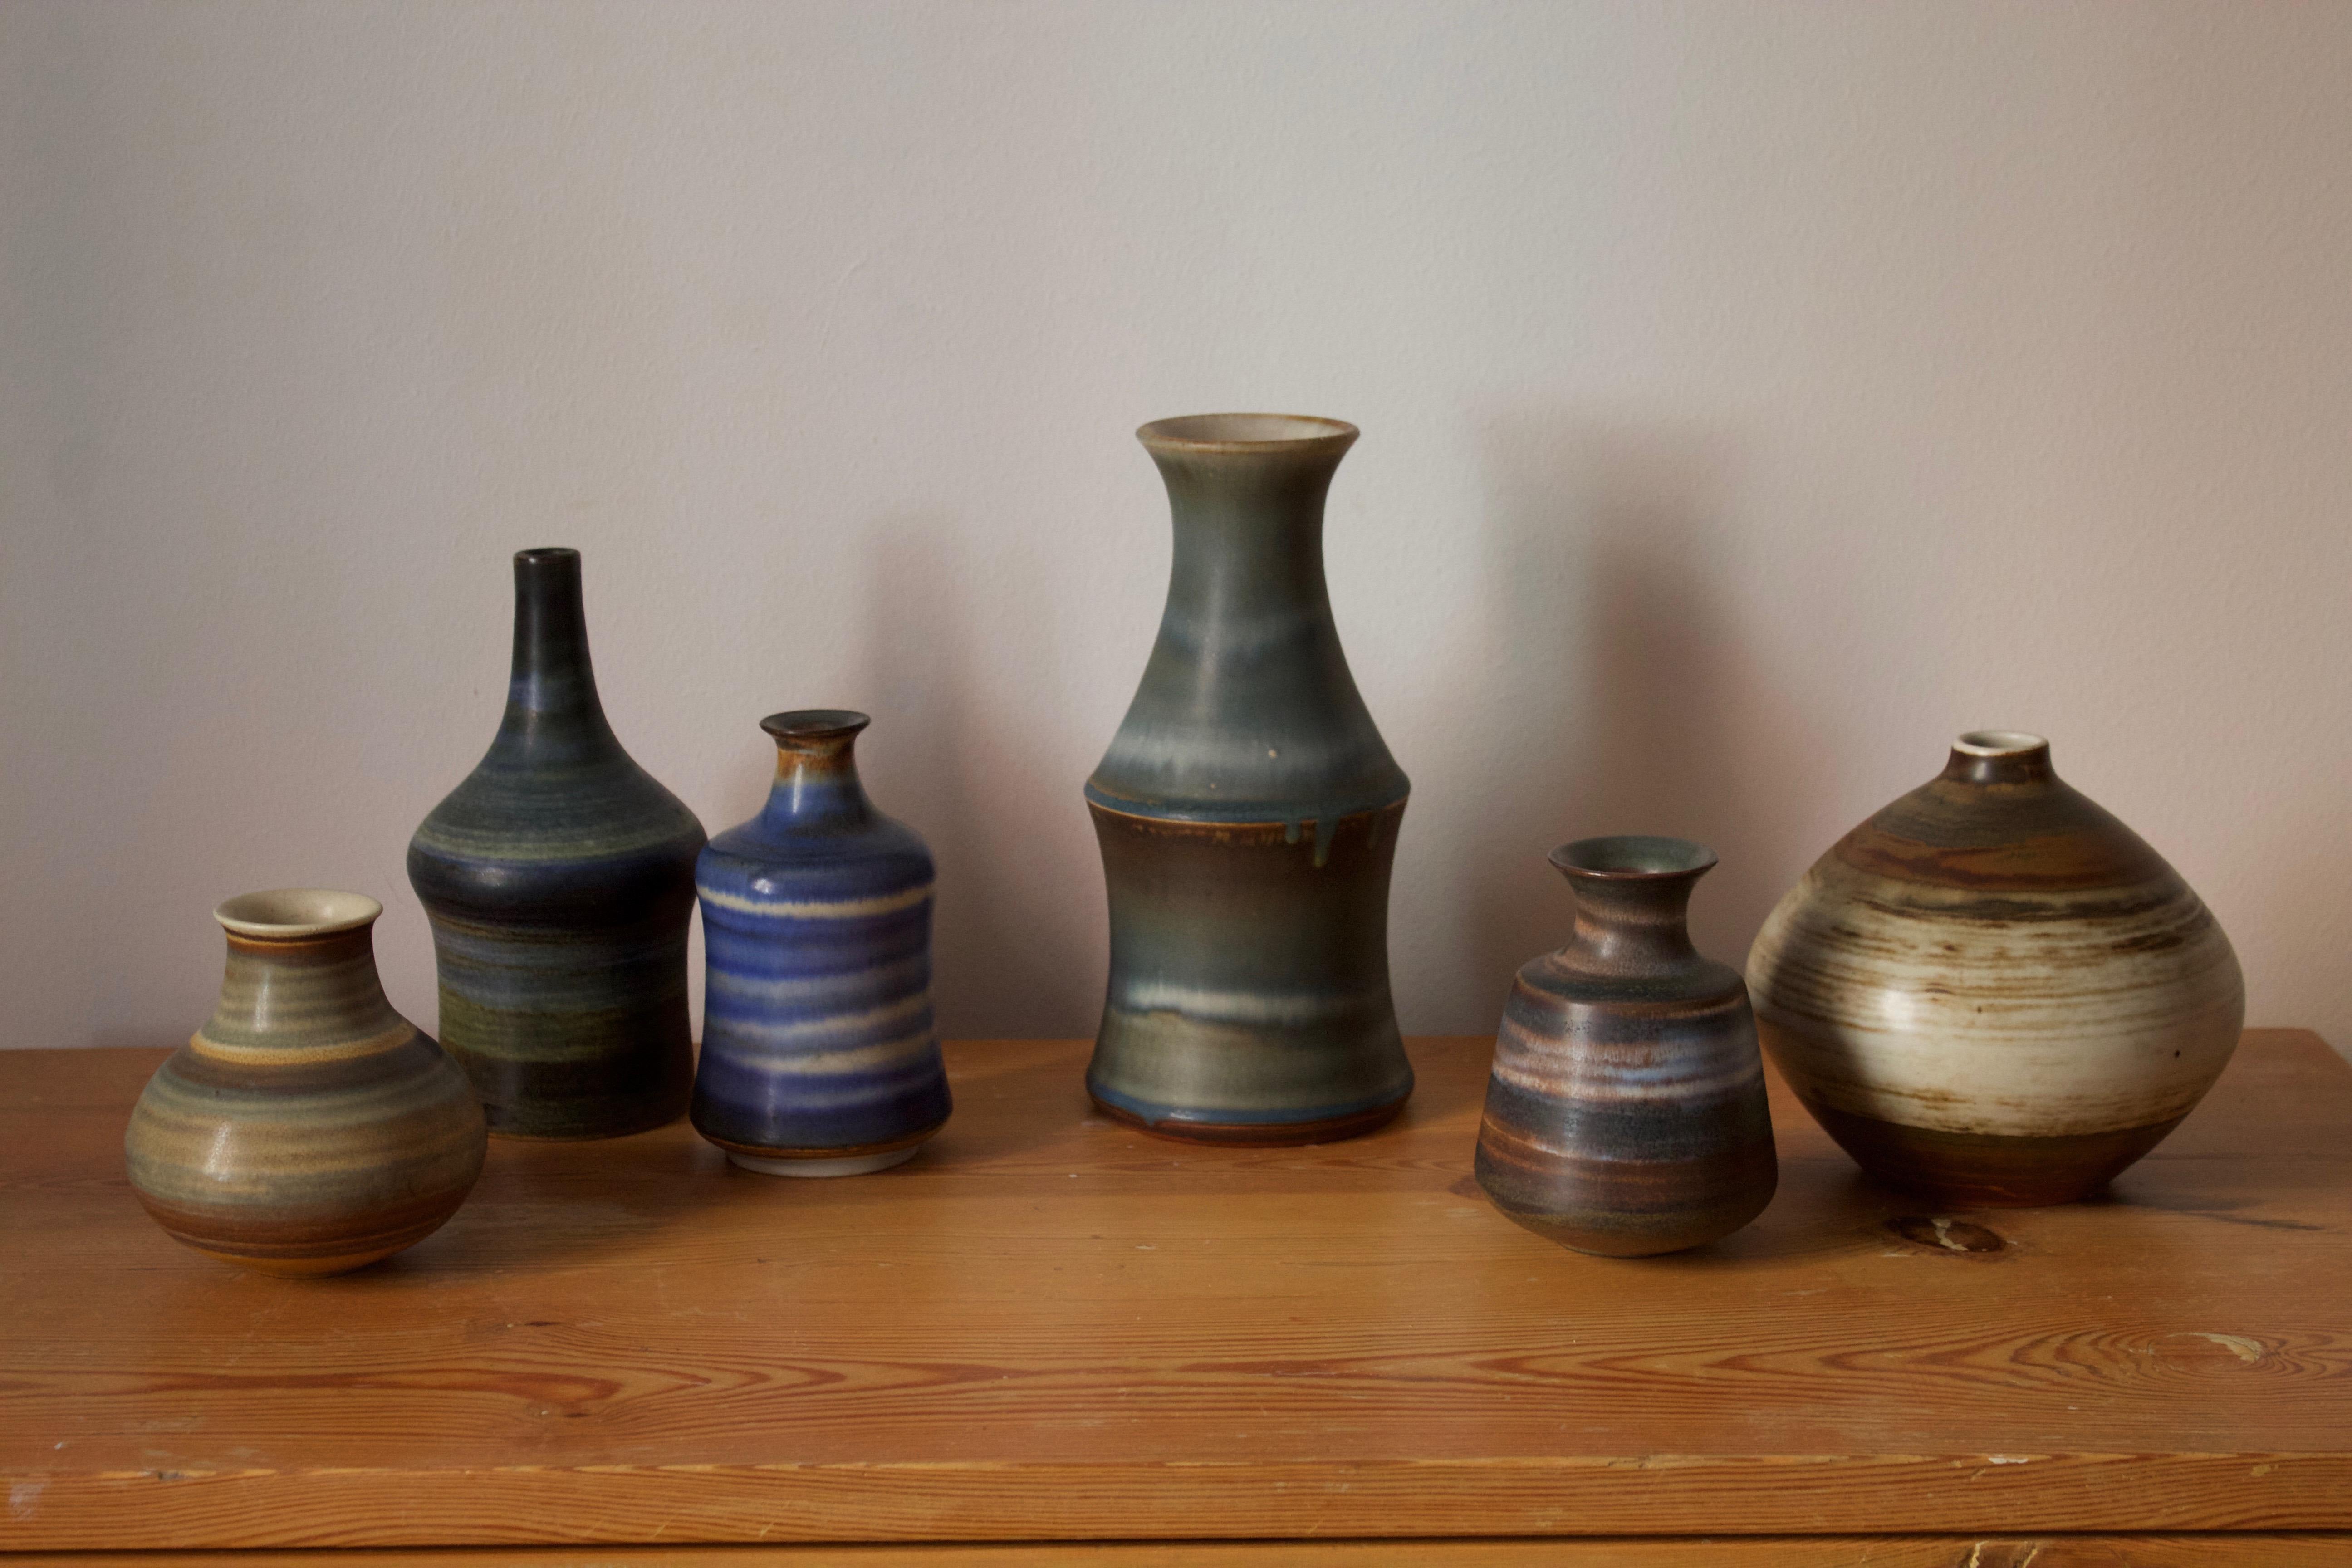 A set of six studio vases, designed by John Andersson (Swedish, 1899-1969). Produced by Höganäs Keramik. Signed.

Other ceramicists of the period include Axel Salto, Carl Harry-Stålhane, Bernt Friberg and Arne Bang.